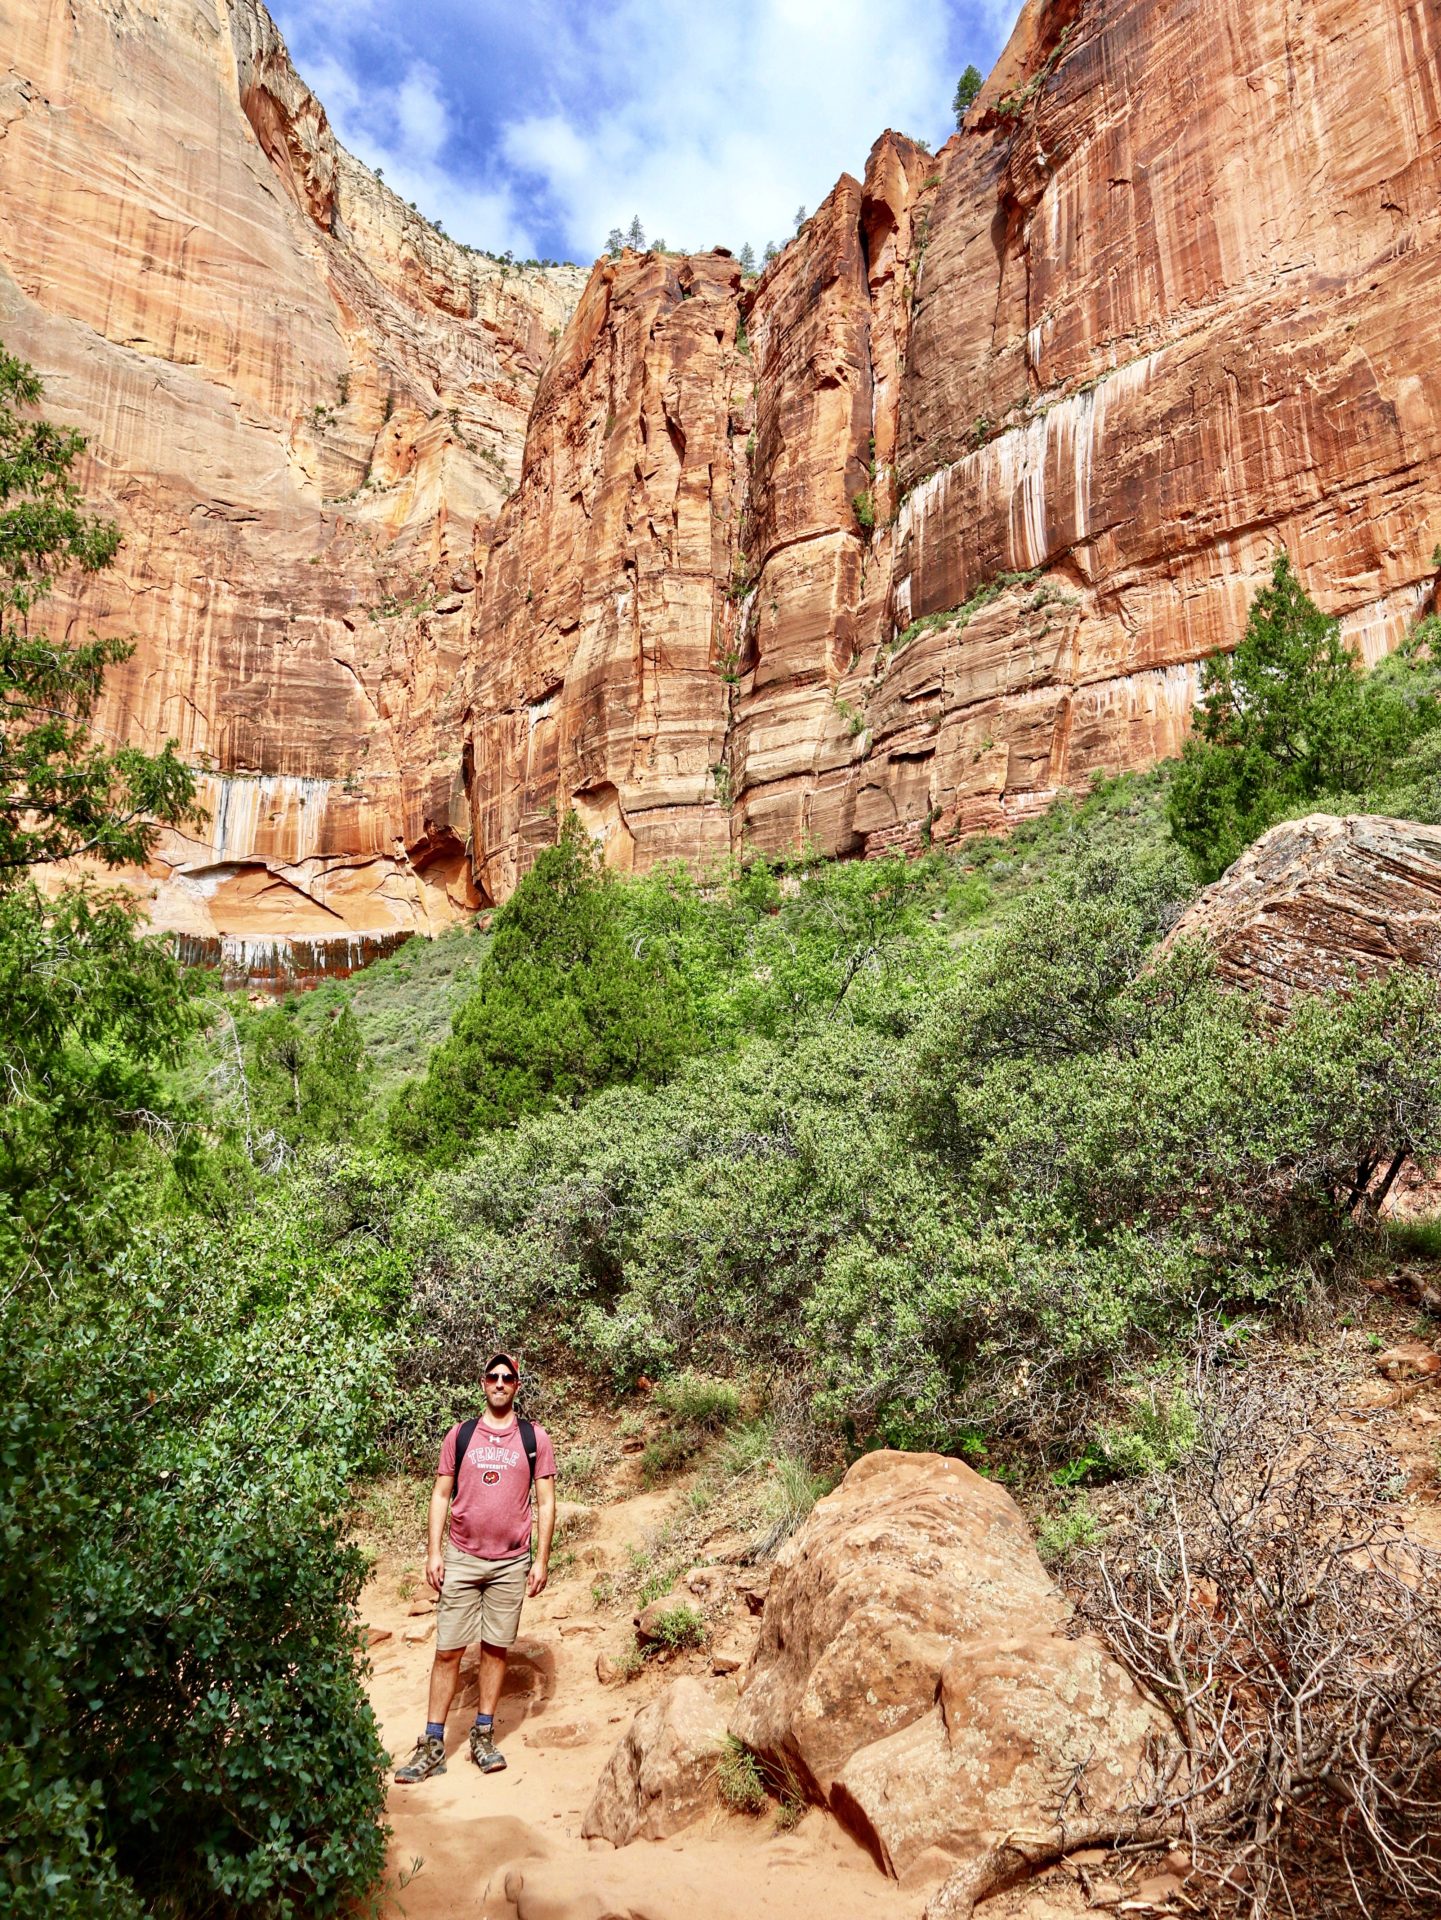 Middle Emerald Pools Trail, Zion National Park